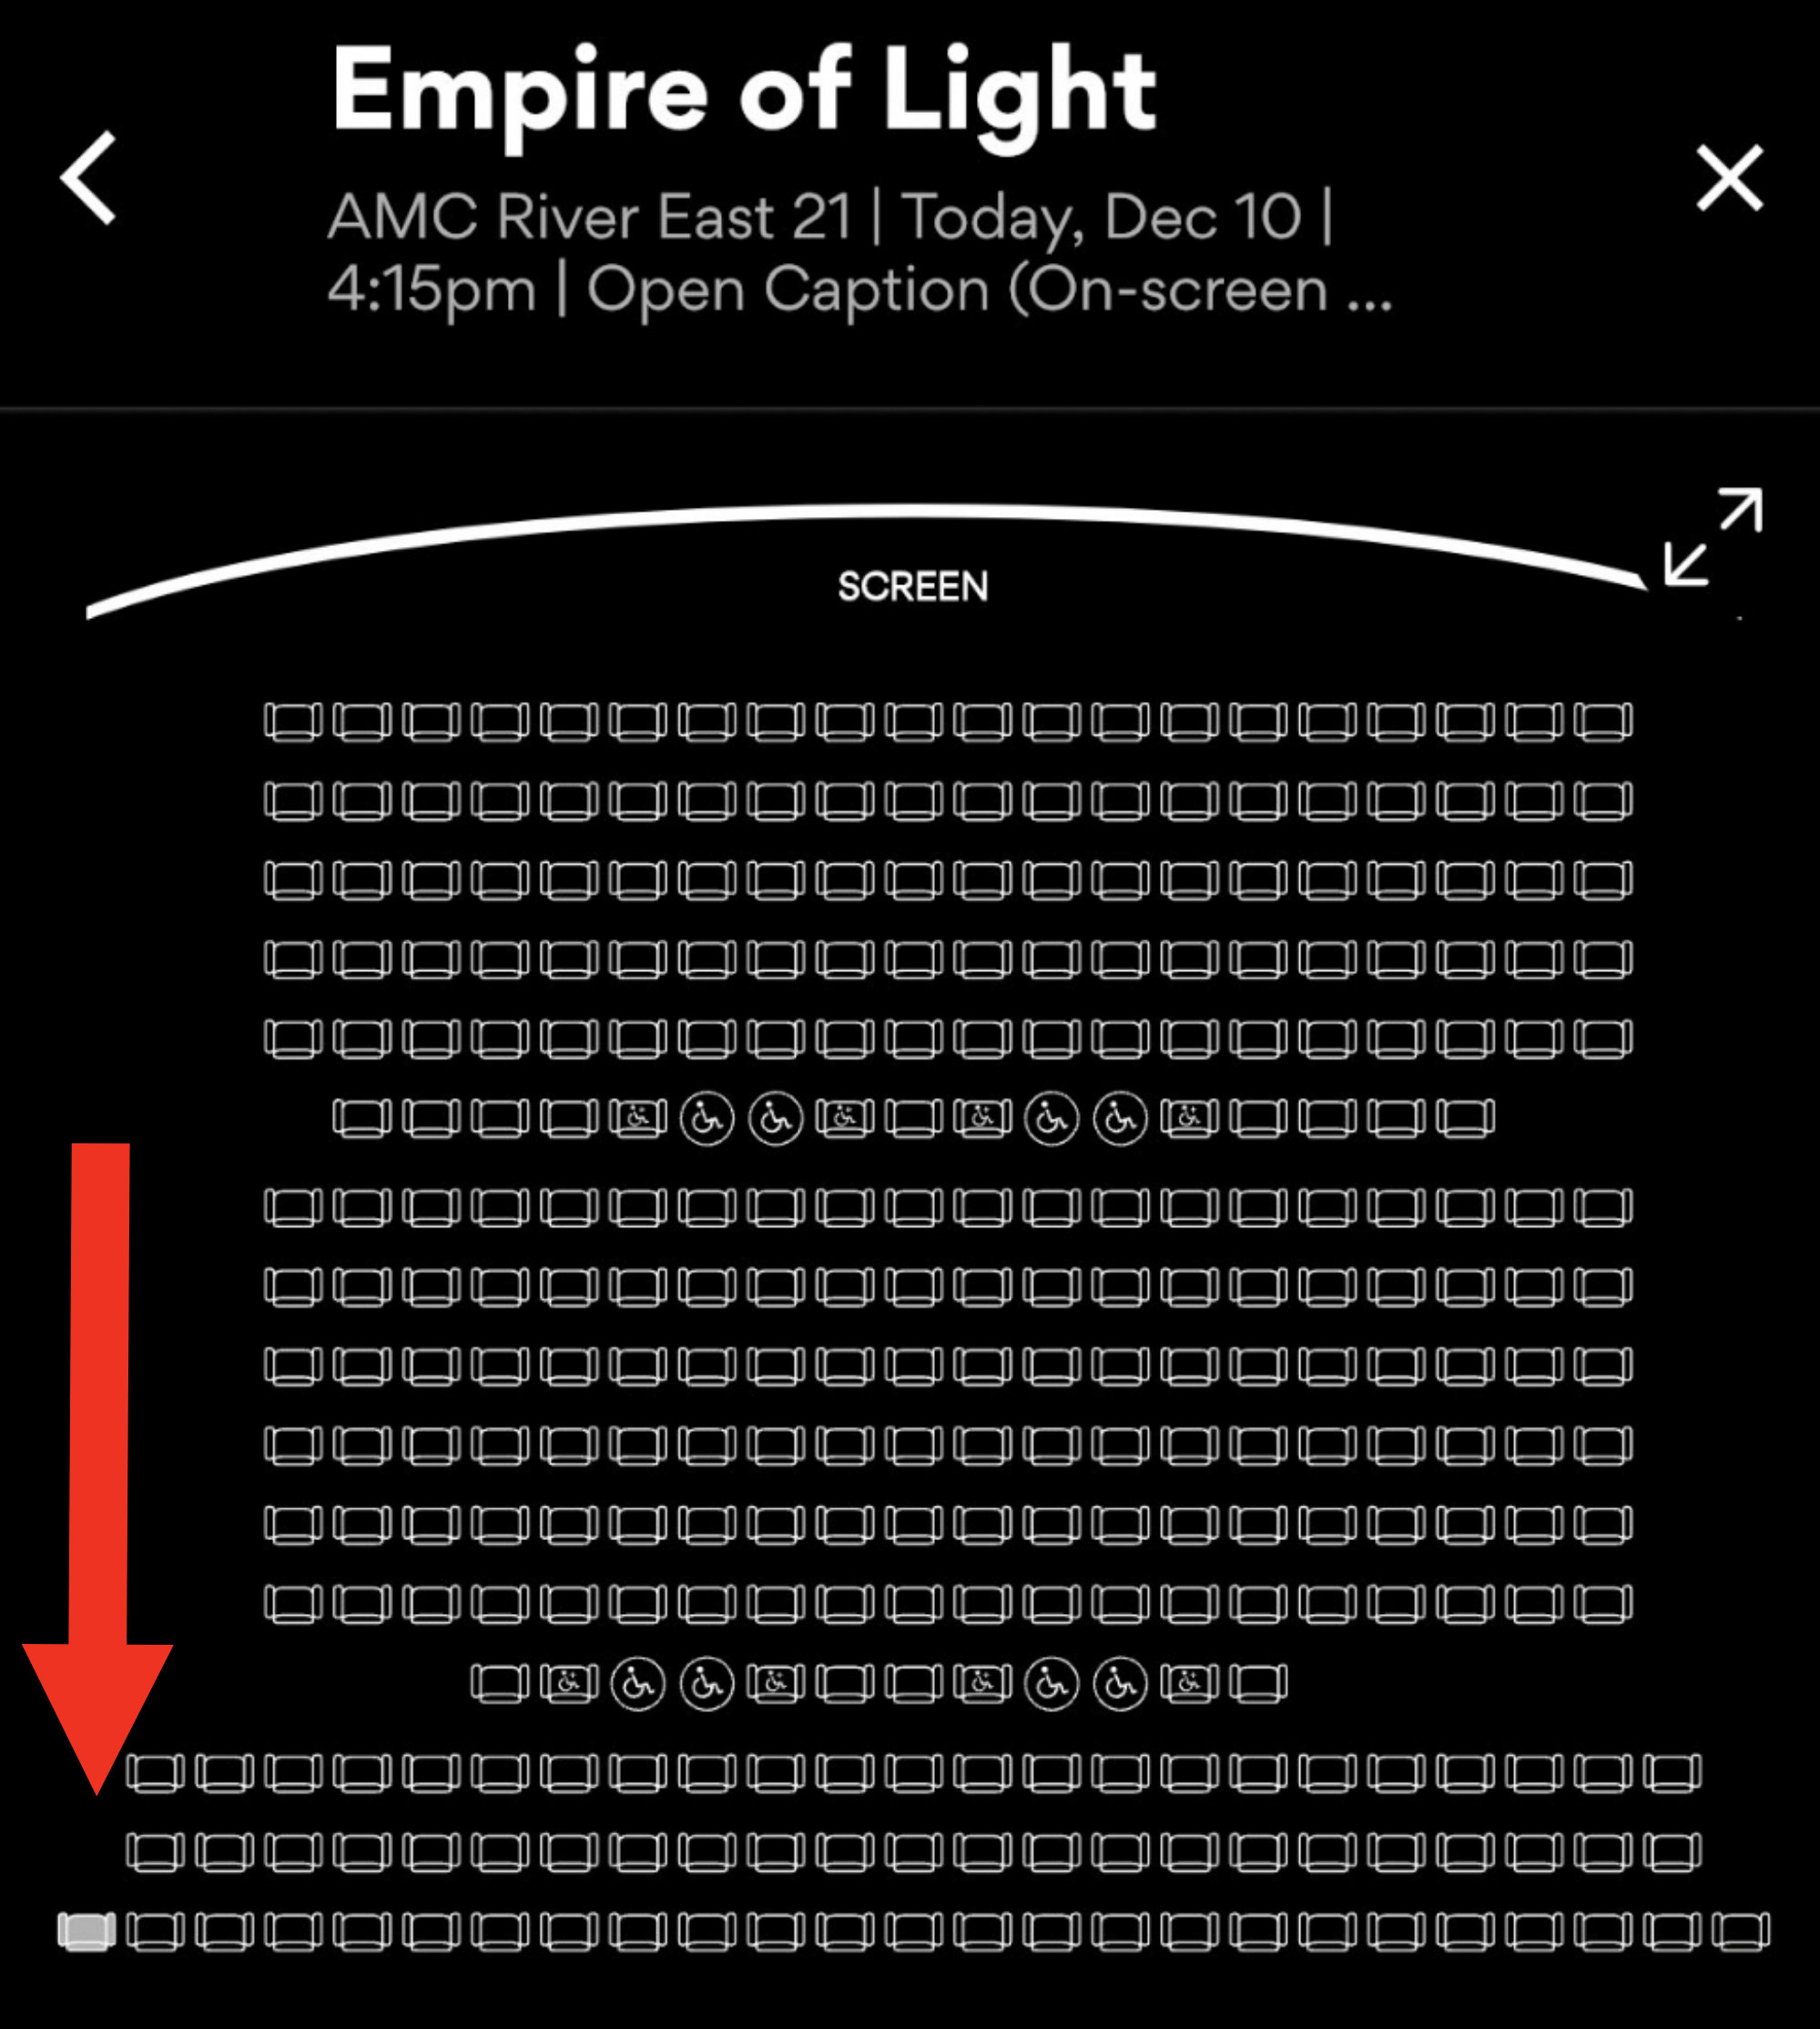 Arrow pointing to one filled seat in a theater seating diagram